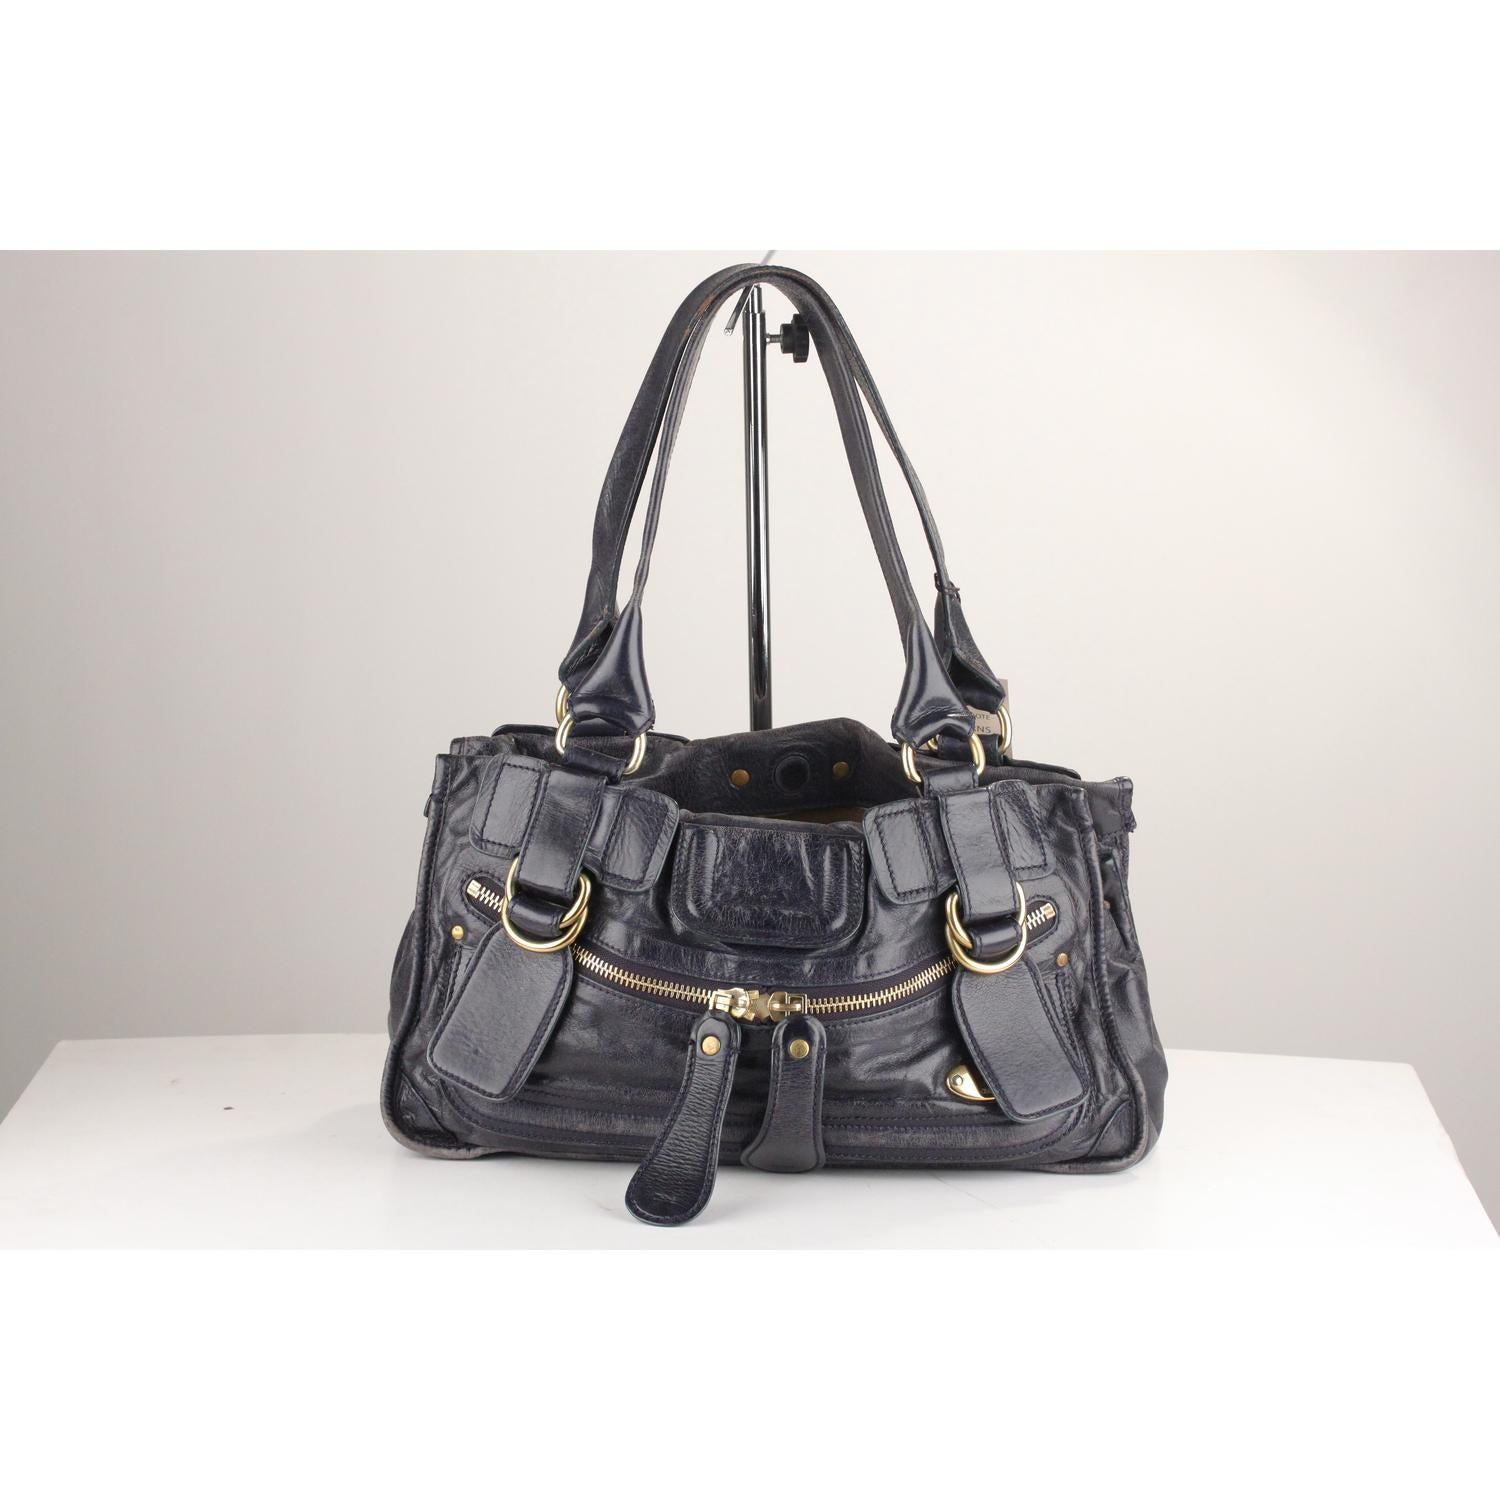 - Chloé Bay Bag shoulder bag
- Crafted in navy blue leather with a light distressed finish
- 2 front zip pockets and 1 hidden pocket on the front
- Double top handles
- Magnetic concealed button closure
- 2 main sections with 1 middle zipper